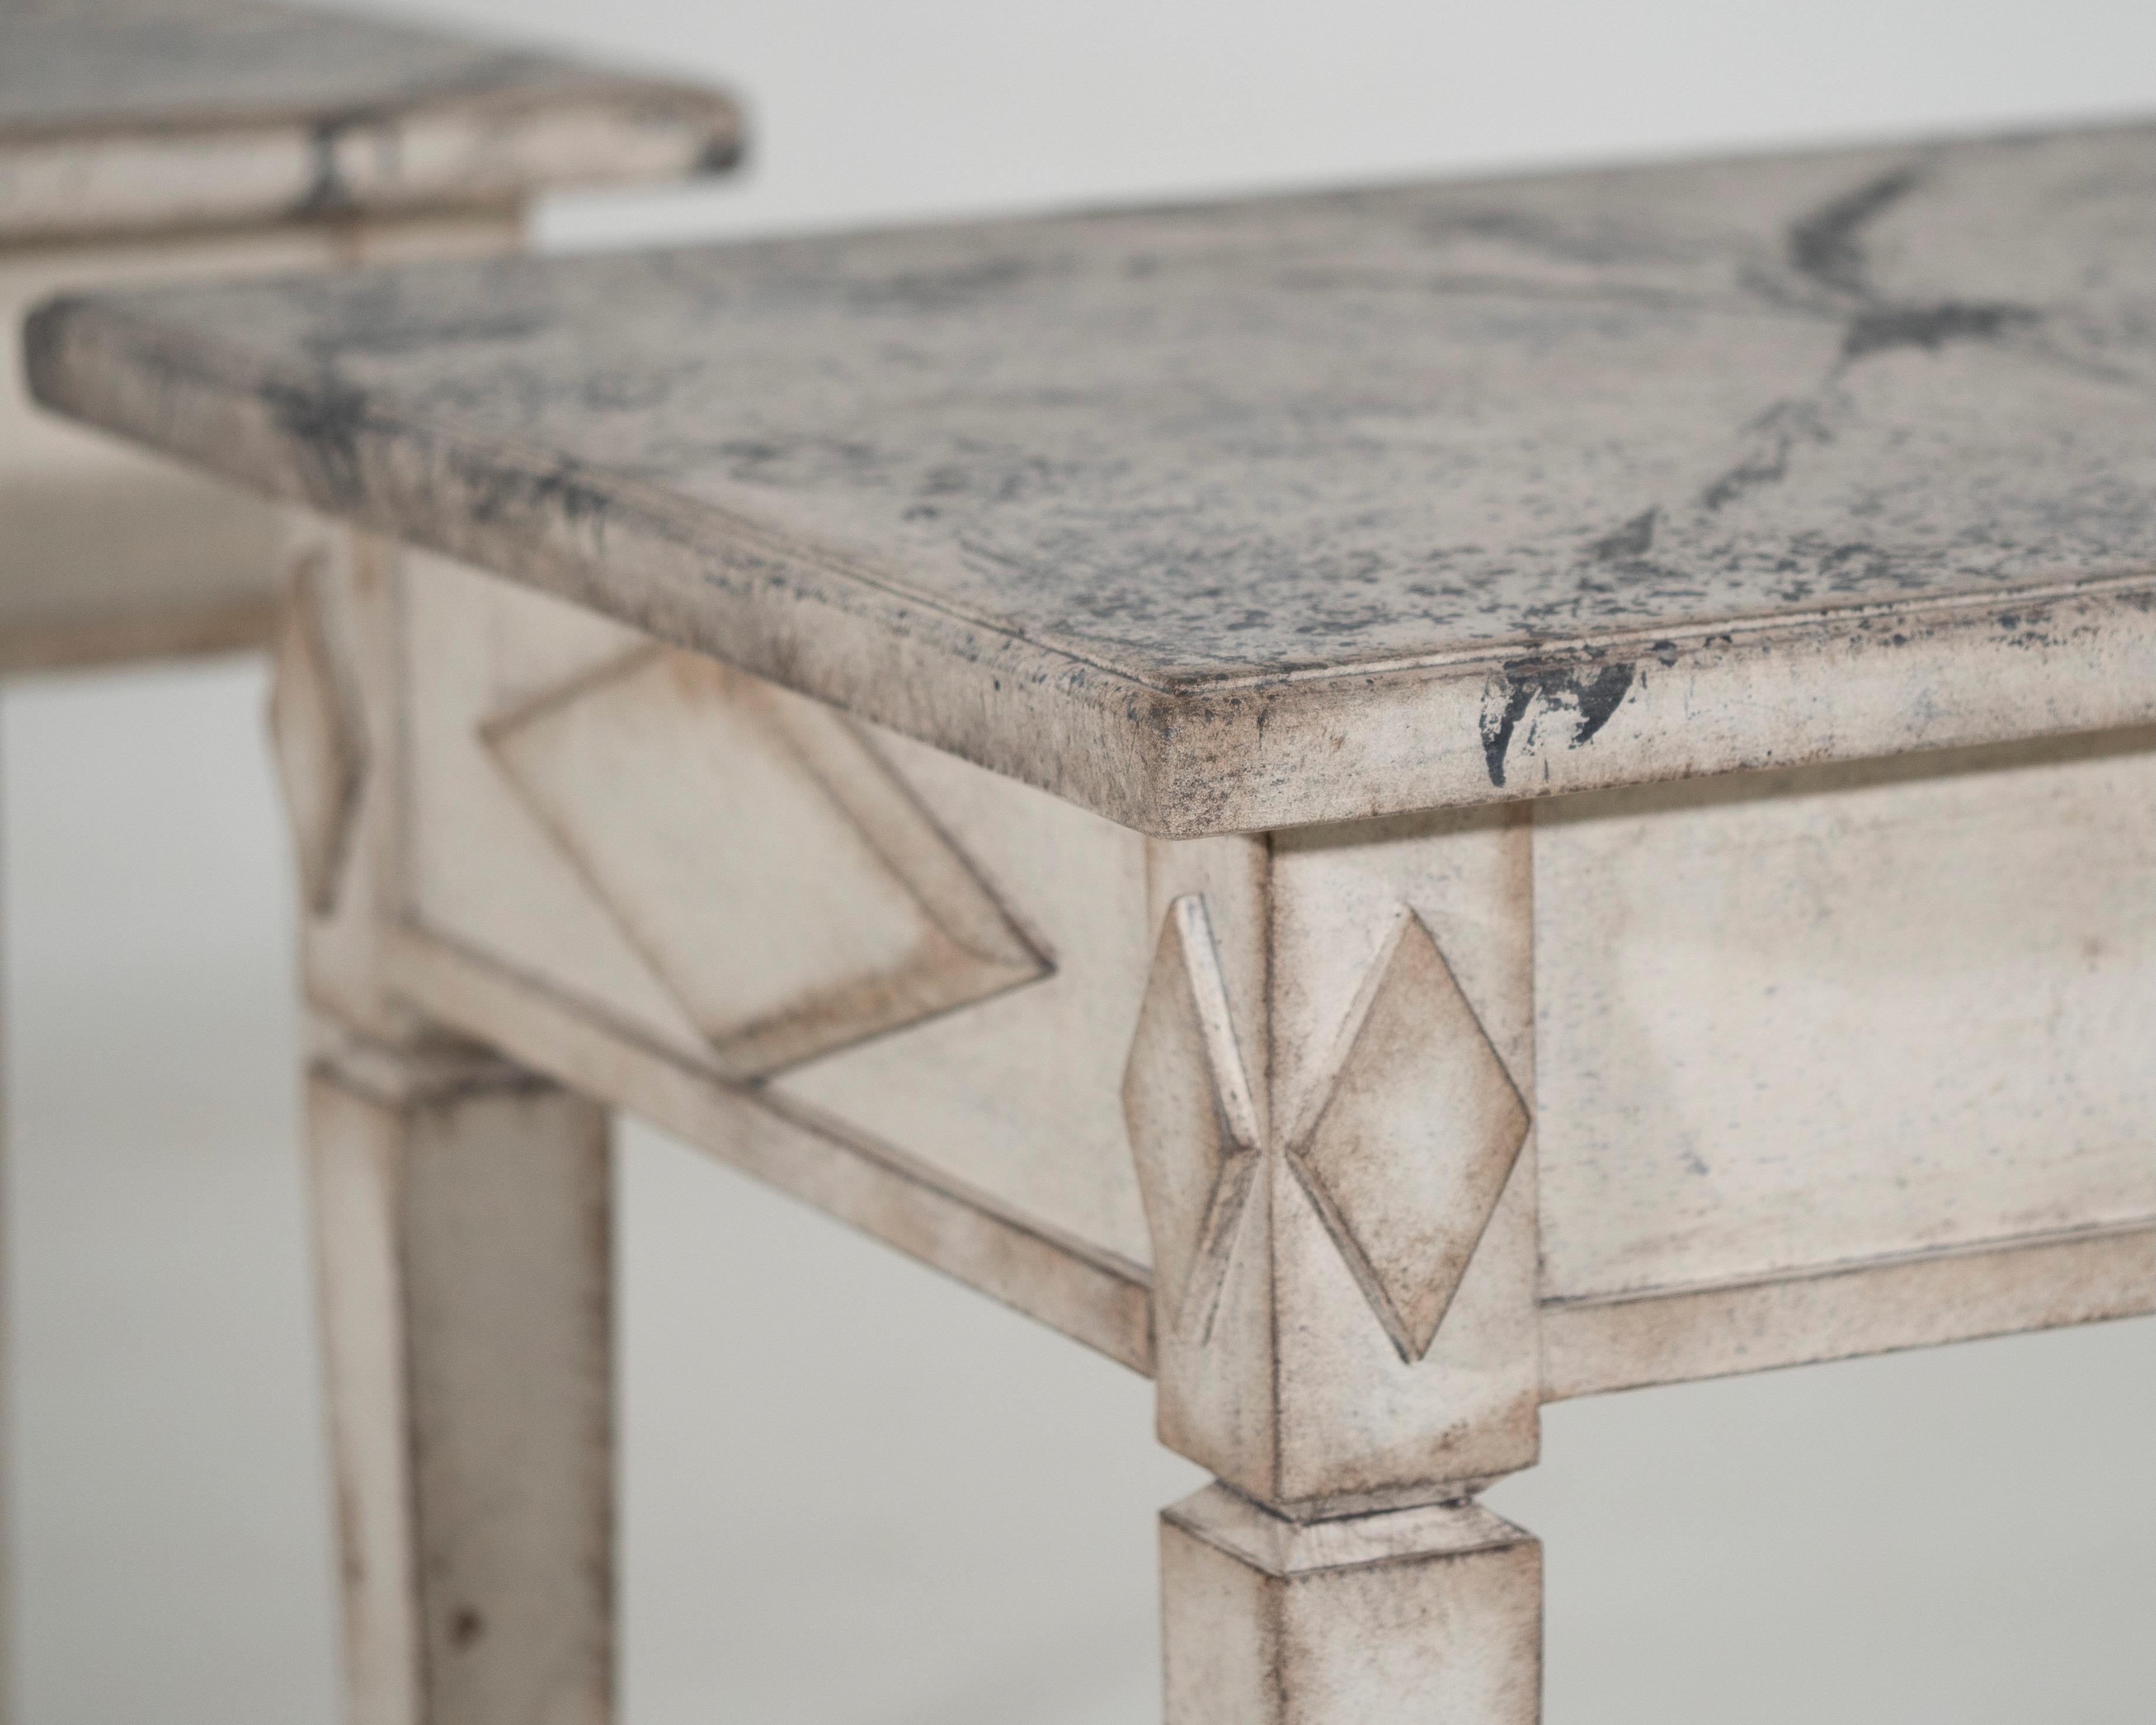 Pair of freestanding Gustavian style console tables, with faux painted marble top and fine decorations on the sides, 20th Century.